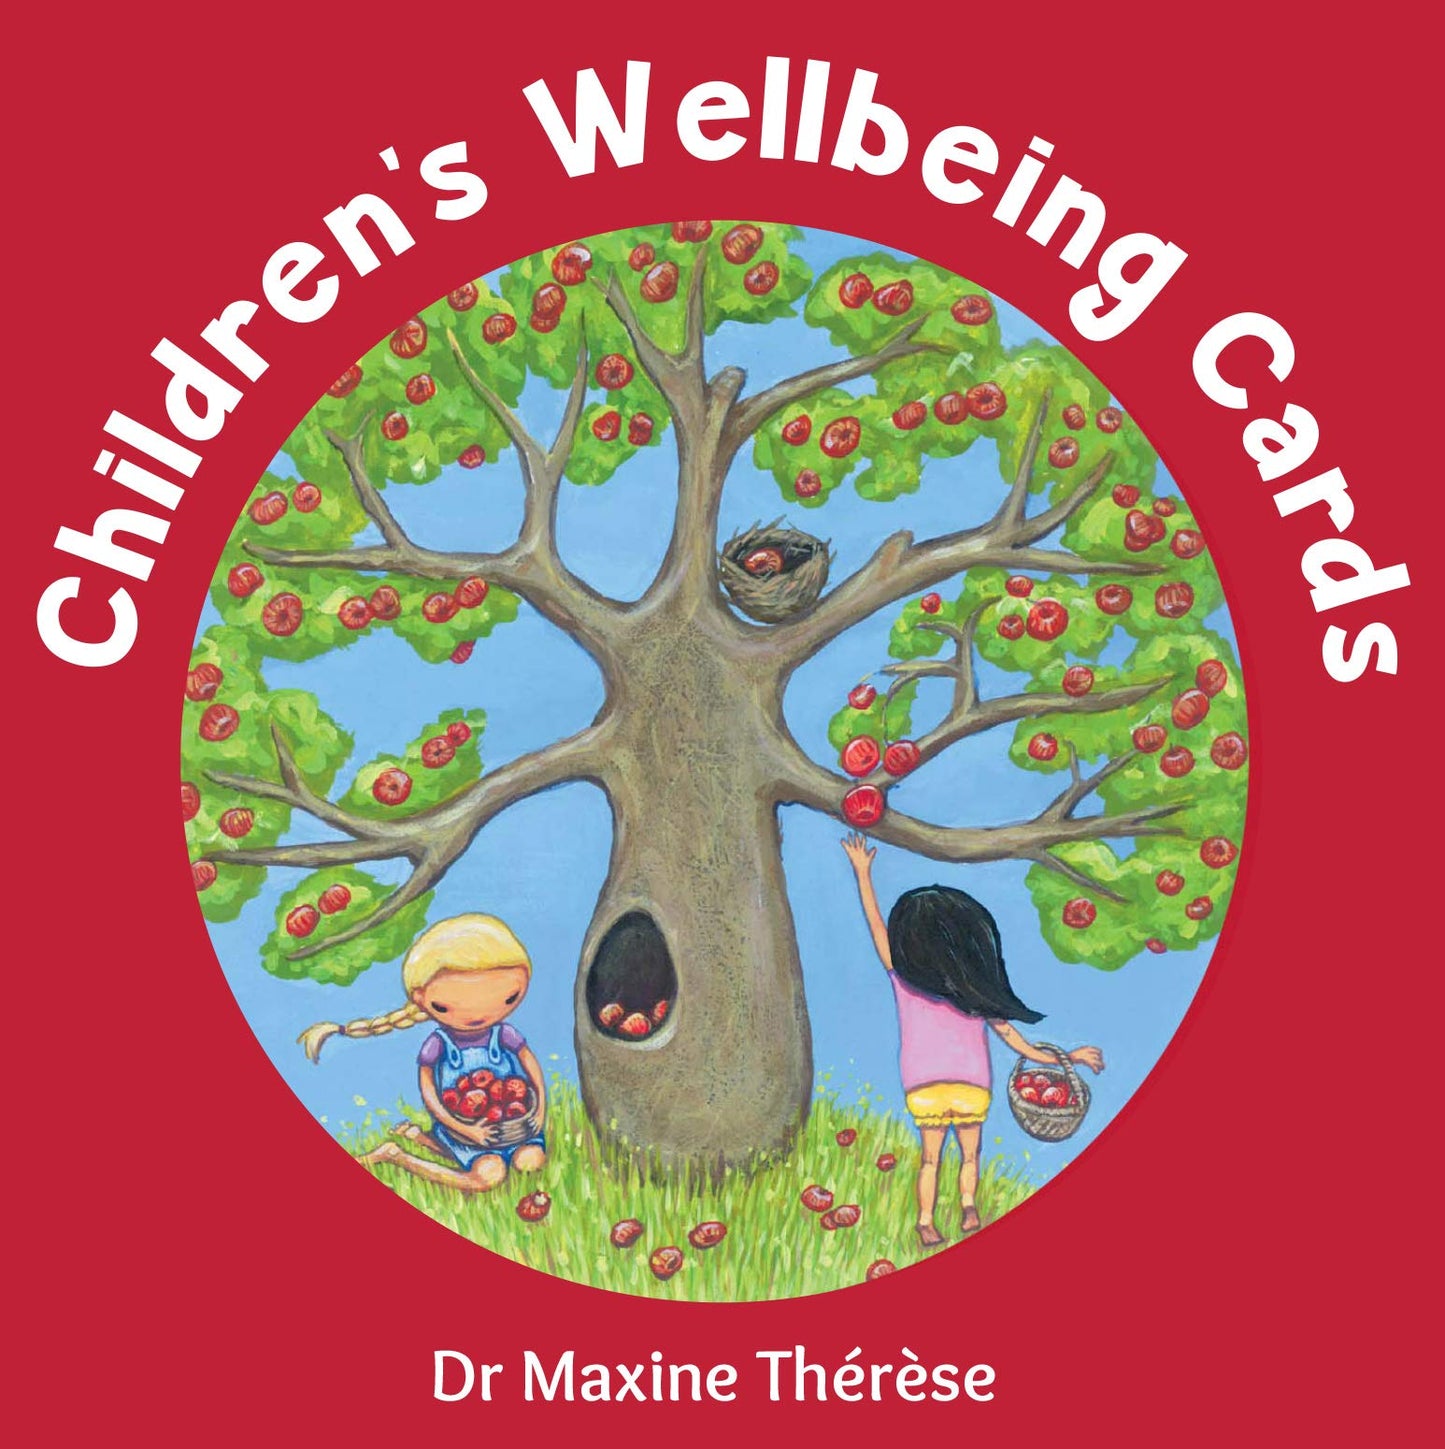 Children's Wellbeing Cards || Dr Maxine Therese